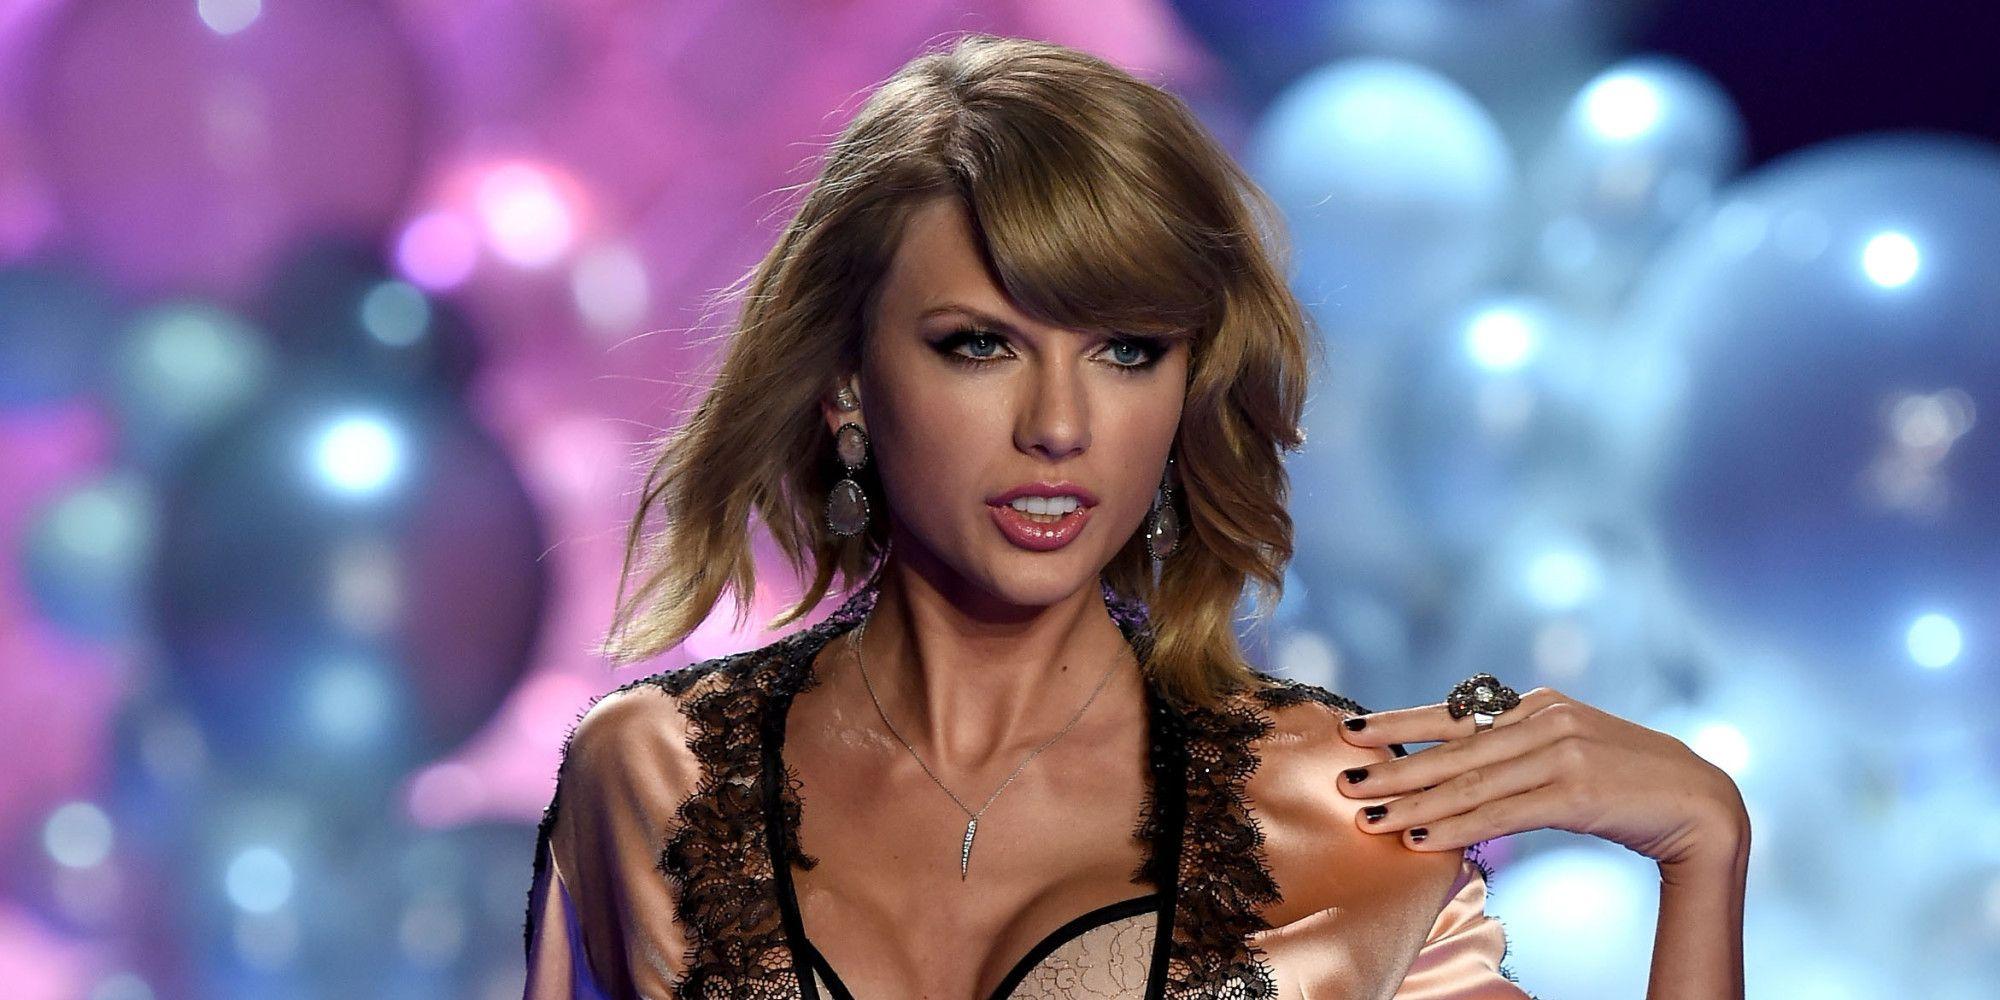 iTooDo: Taylor Swift Pregnant and Ready to Start a Family?